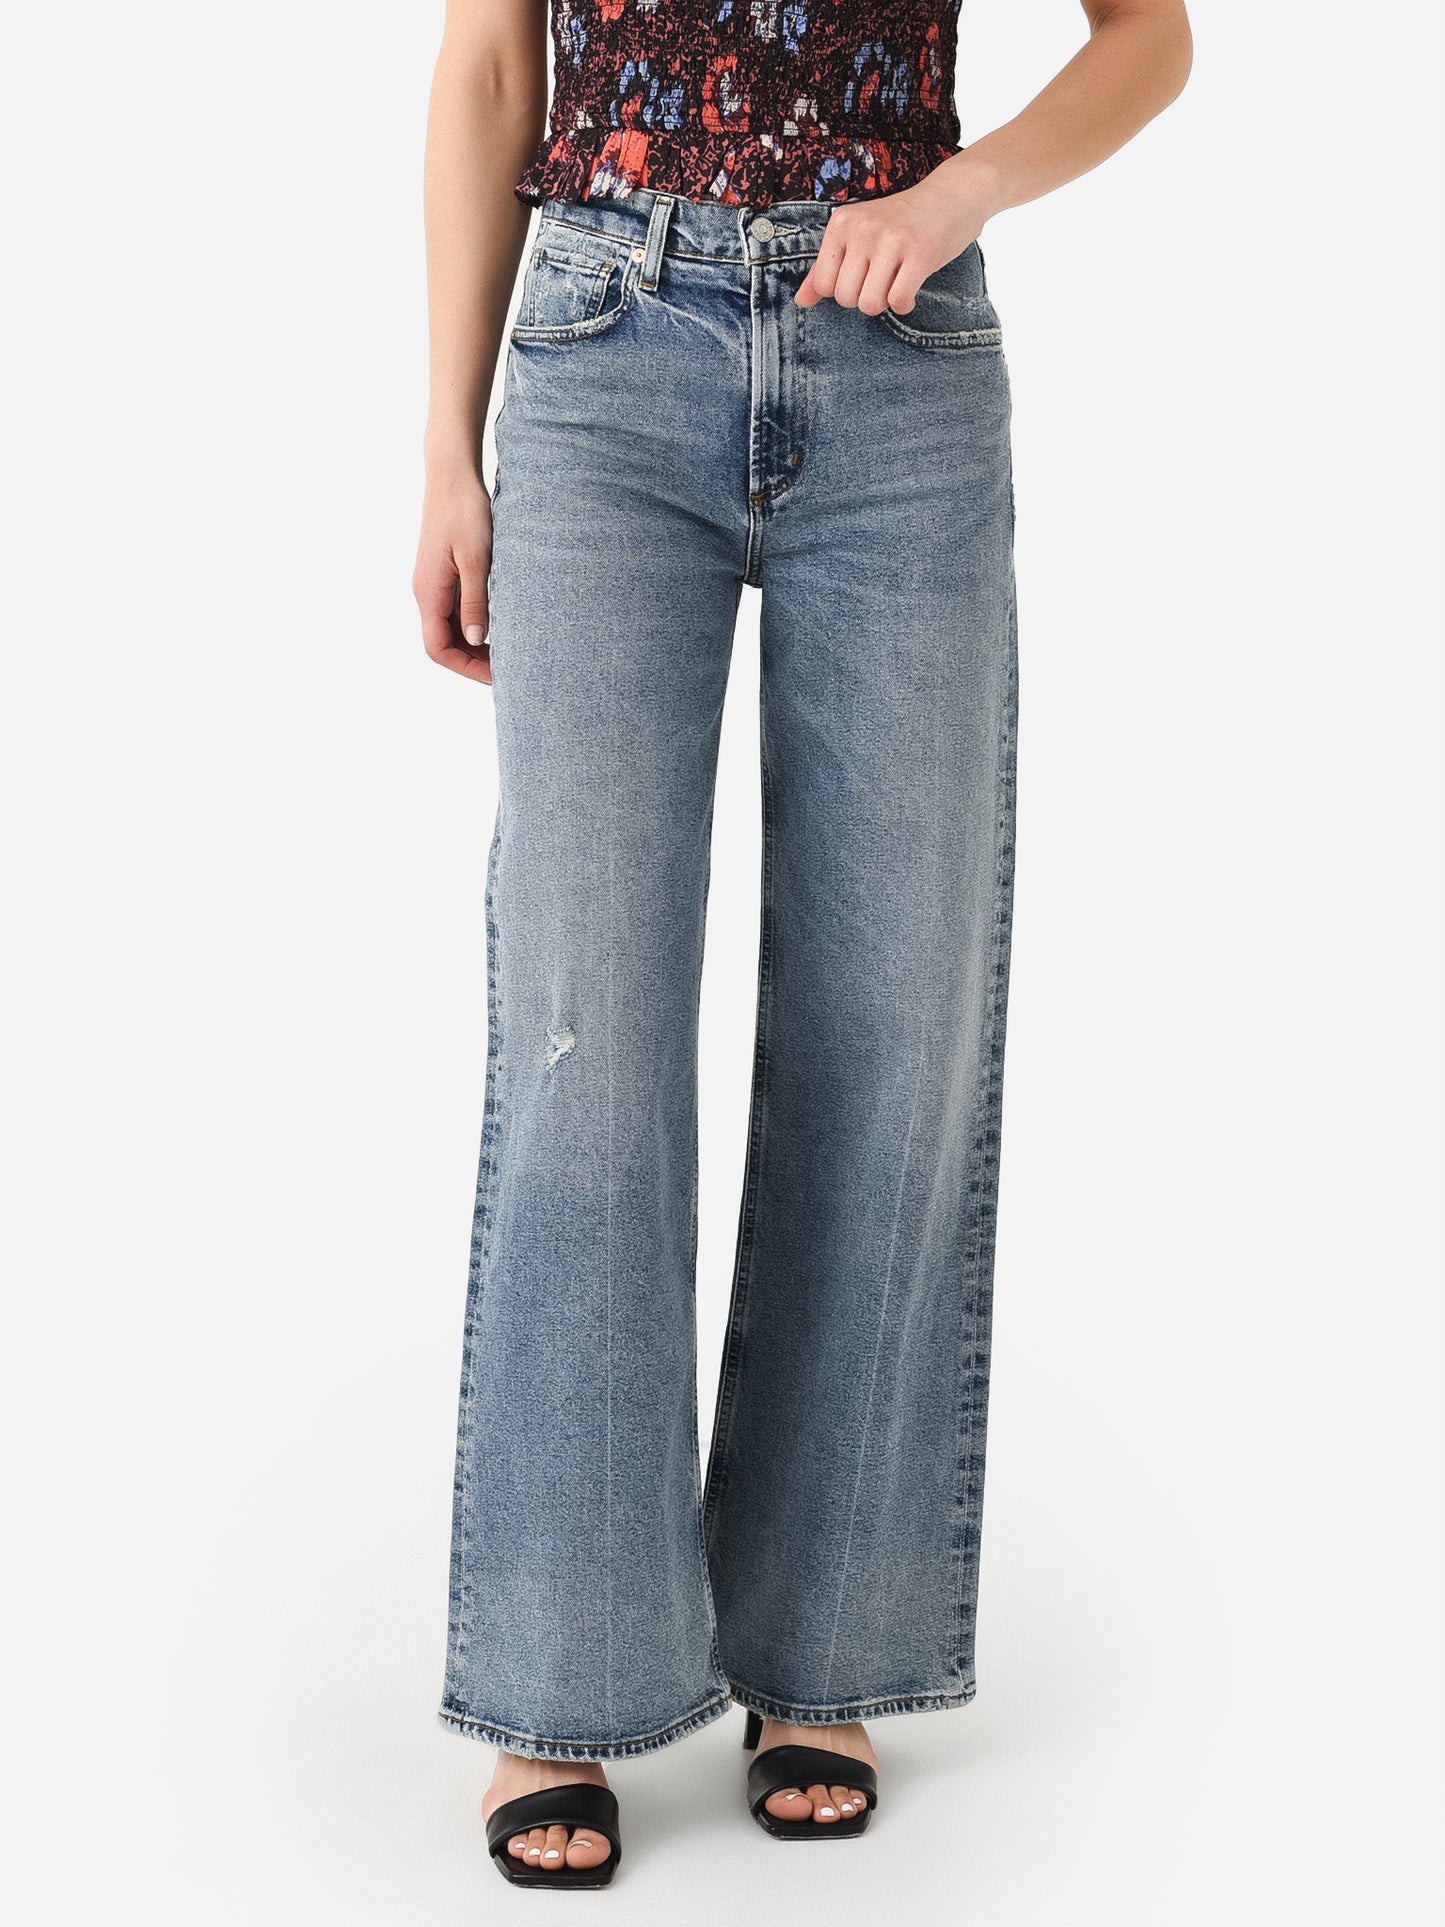 Citizens Of Humanity Women's Paloma Baggy Jean